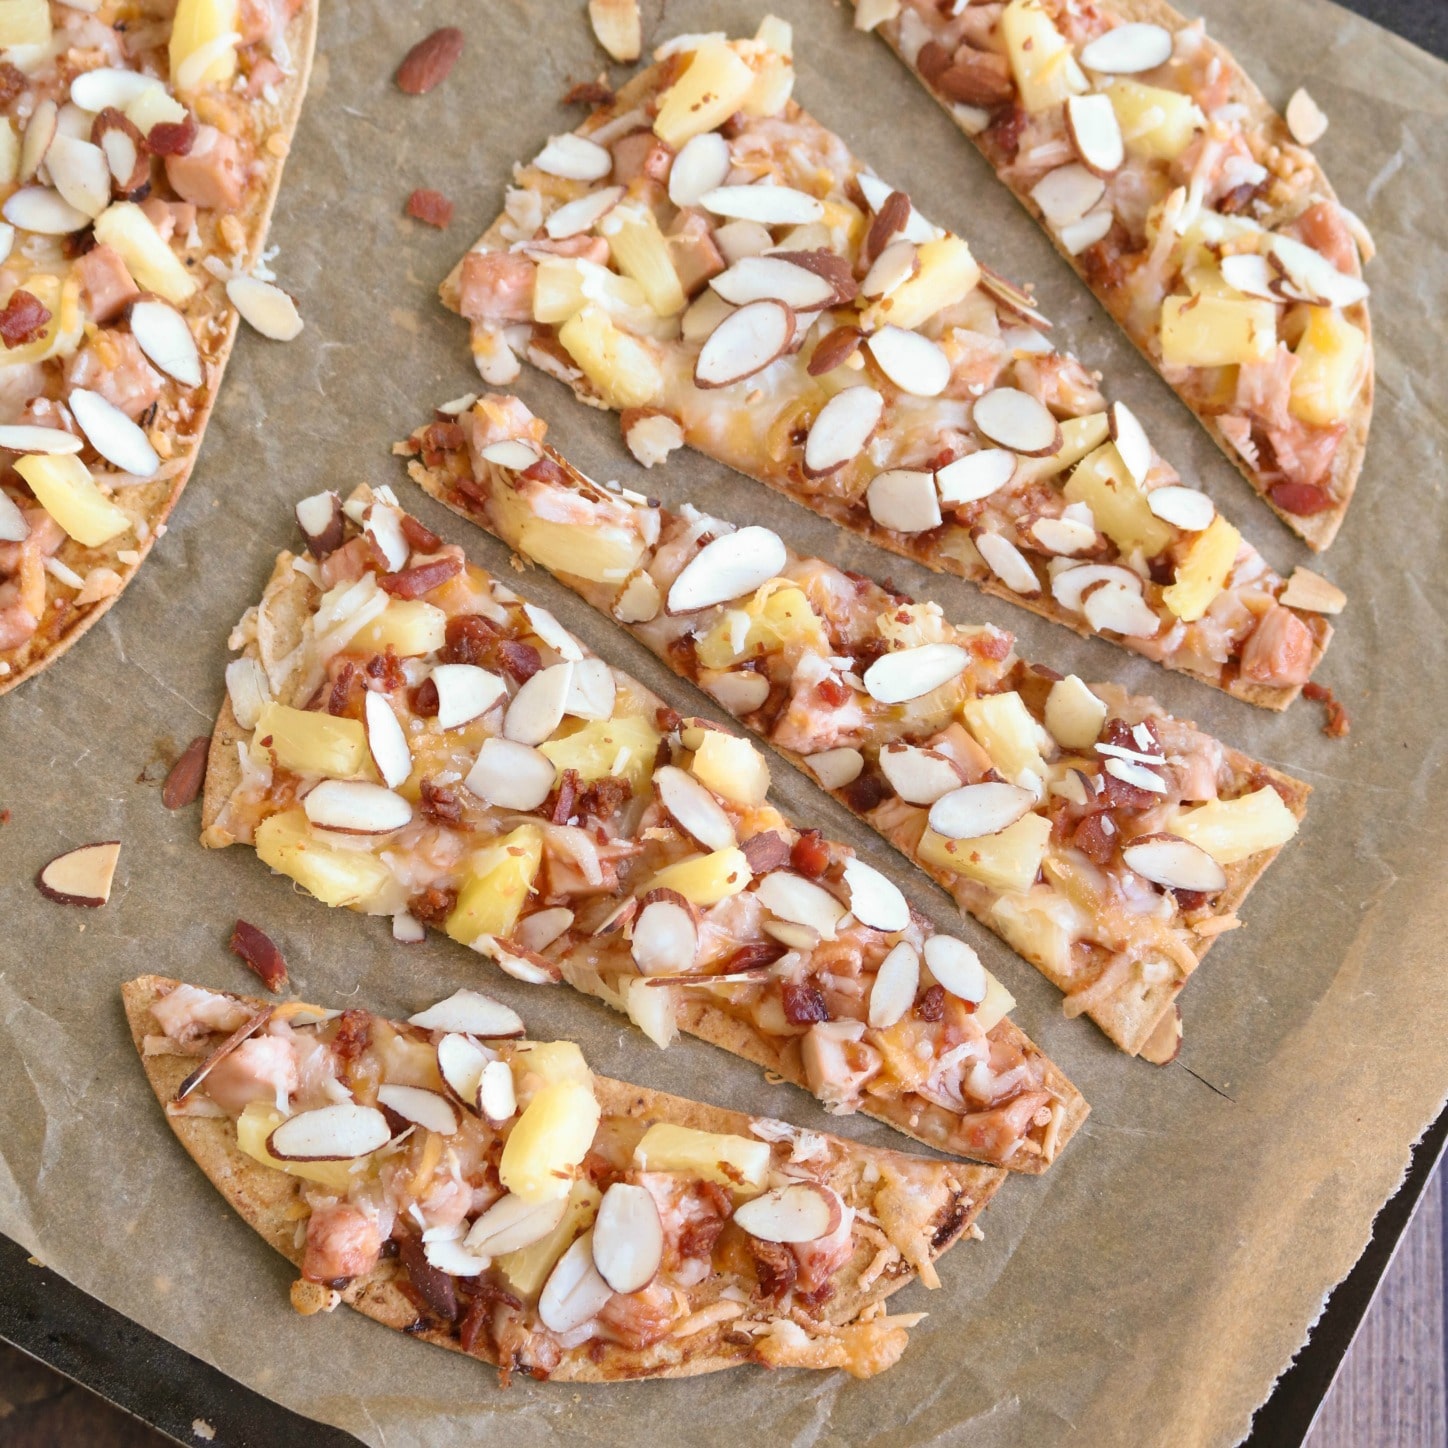 This Sweet and Sour Chicken Flatbread Pizza is so many awesome things in one! It’s like your favorite Chinese sweet and sour chicken met up with a BBQ chicken pizza … all on top of a crispy flatbread crust! Bonus: it’s ready in way under 30 minutes! | www.TwoHealthyKitchens.com